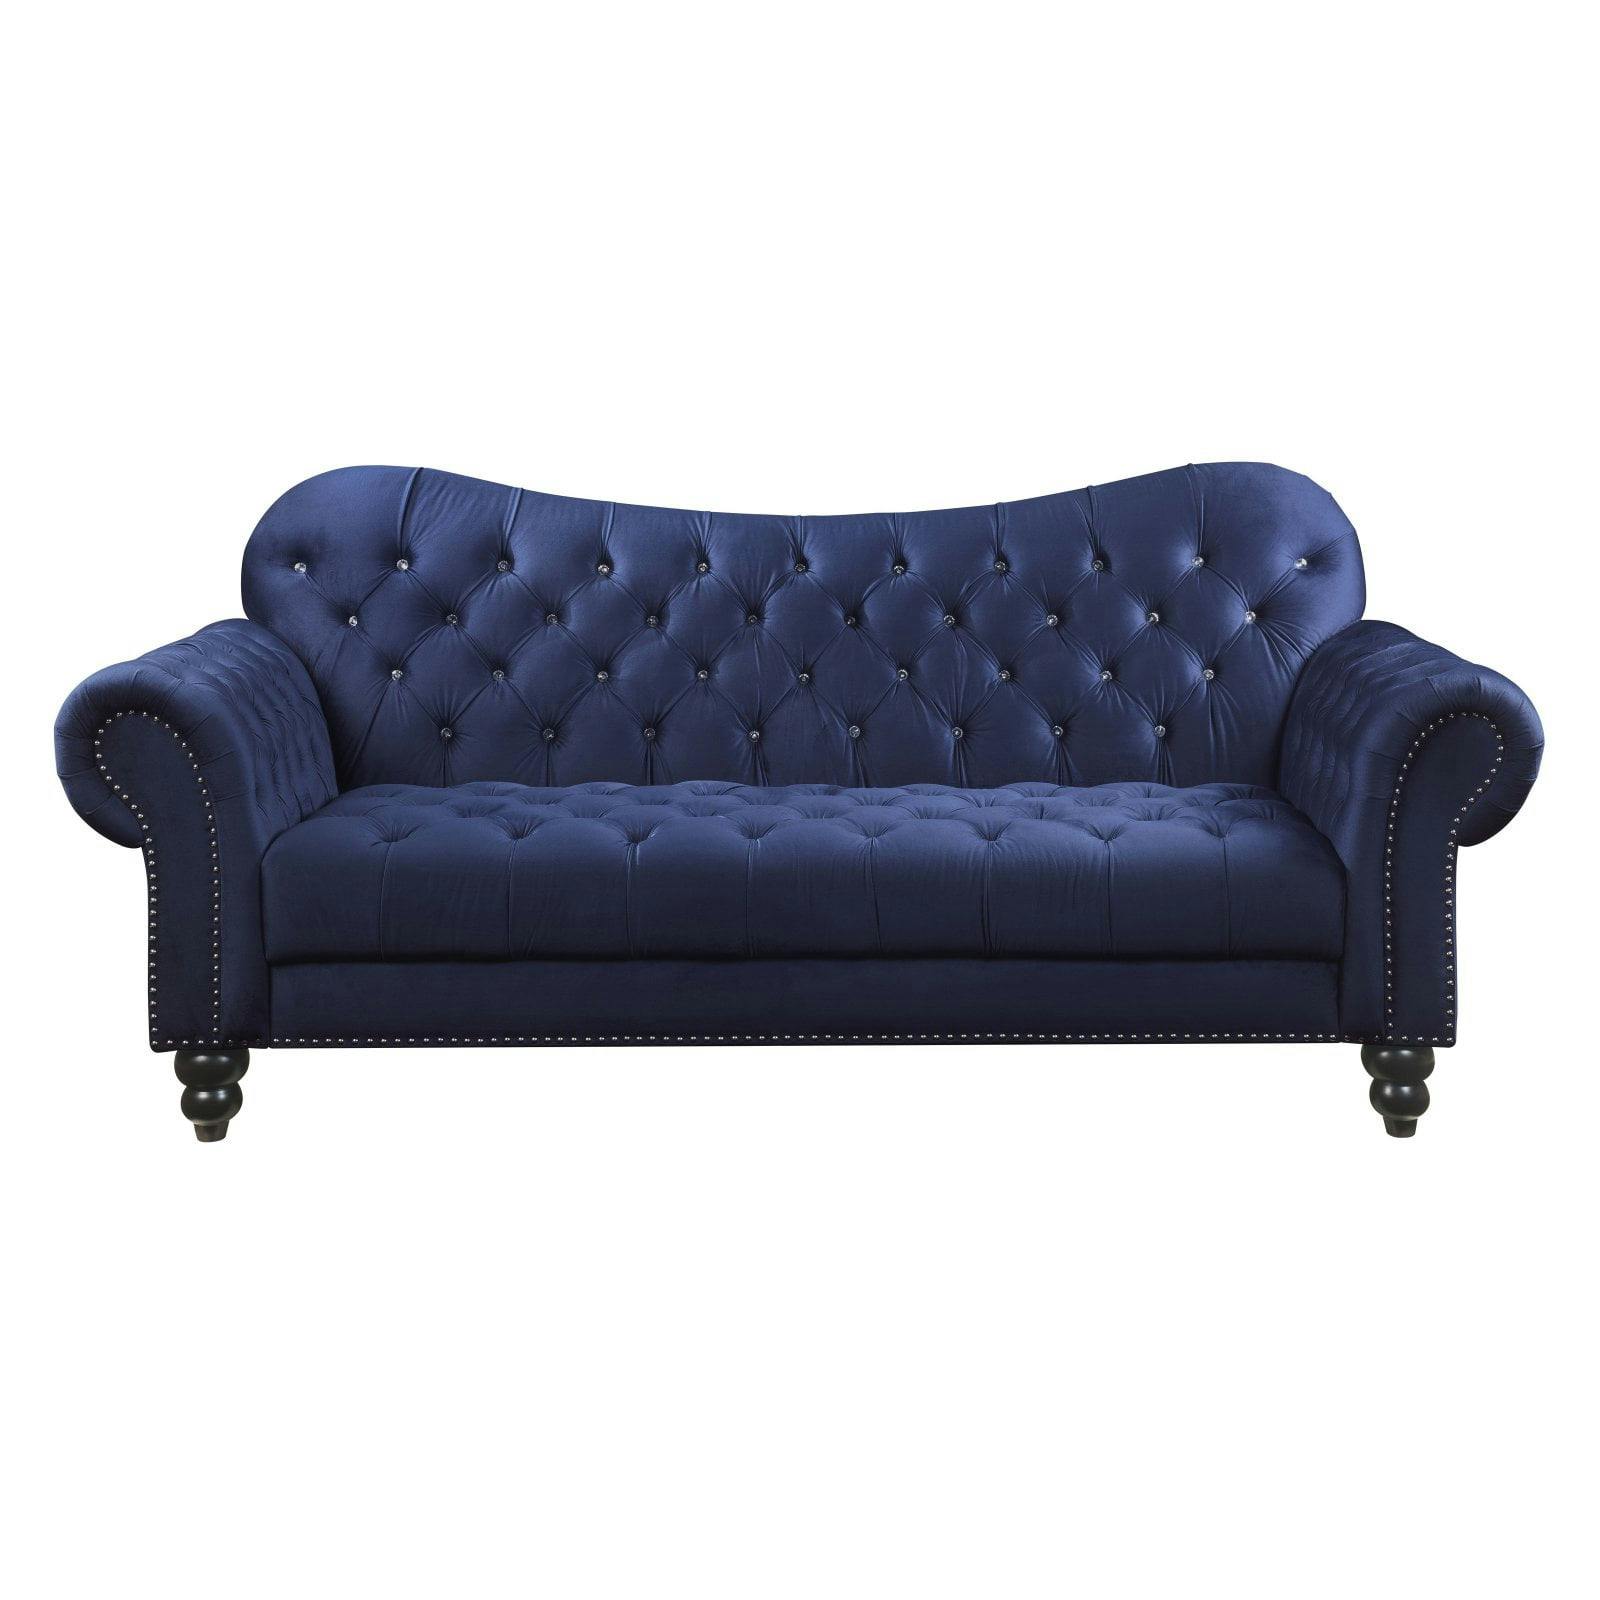 Luxurious Navy Blue Velvet Chesterfield Sofa with Nailhead Accents